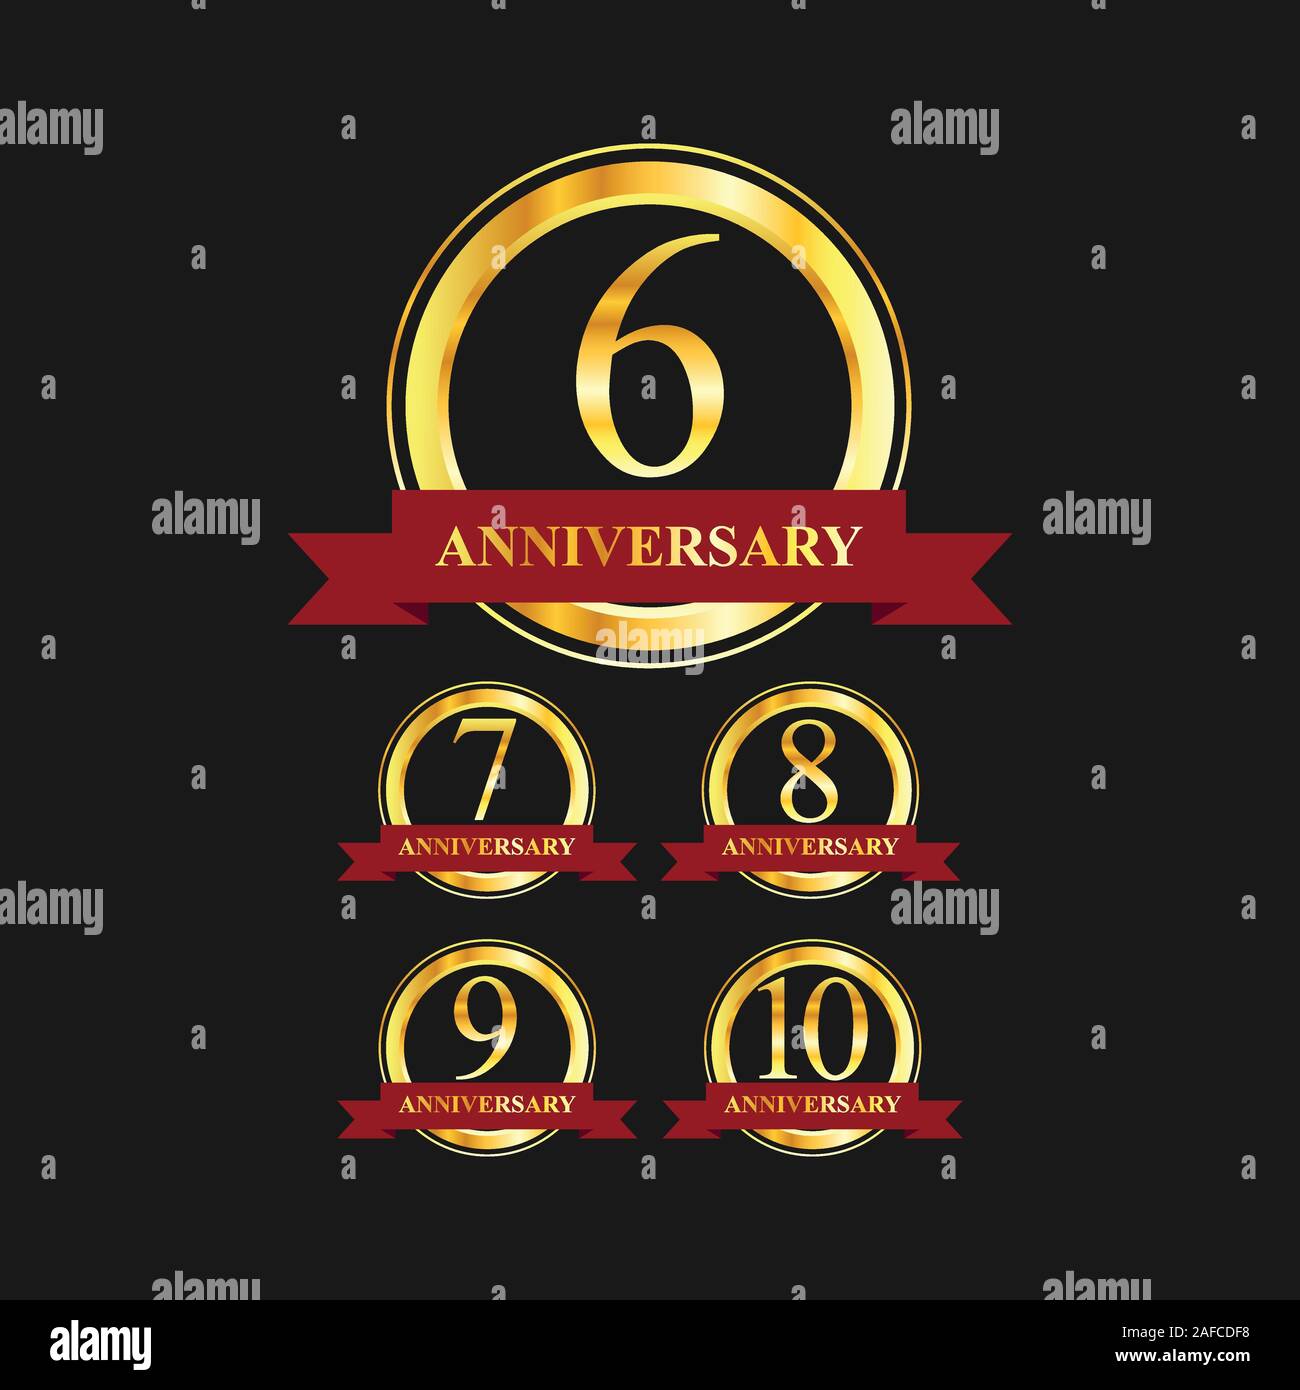 6 to 10 year anniversary gold label vector image. Golden anniversary label vector logo design set Stock Vector